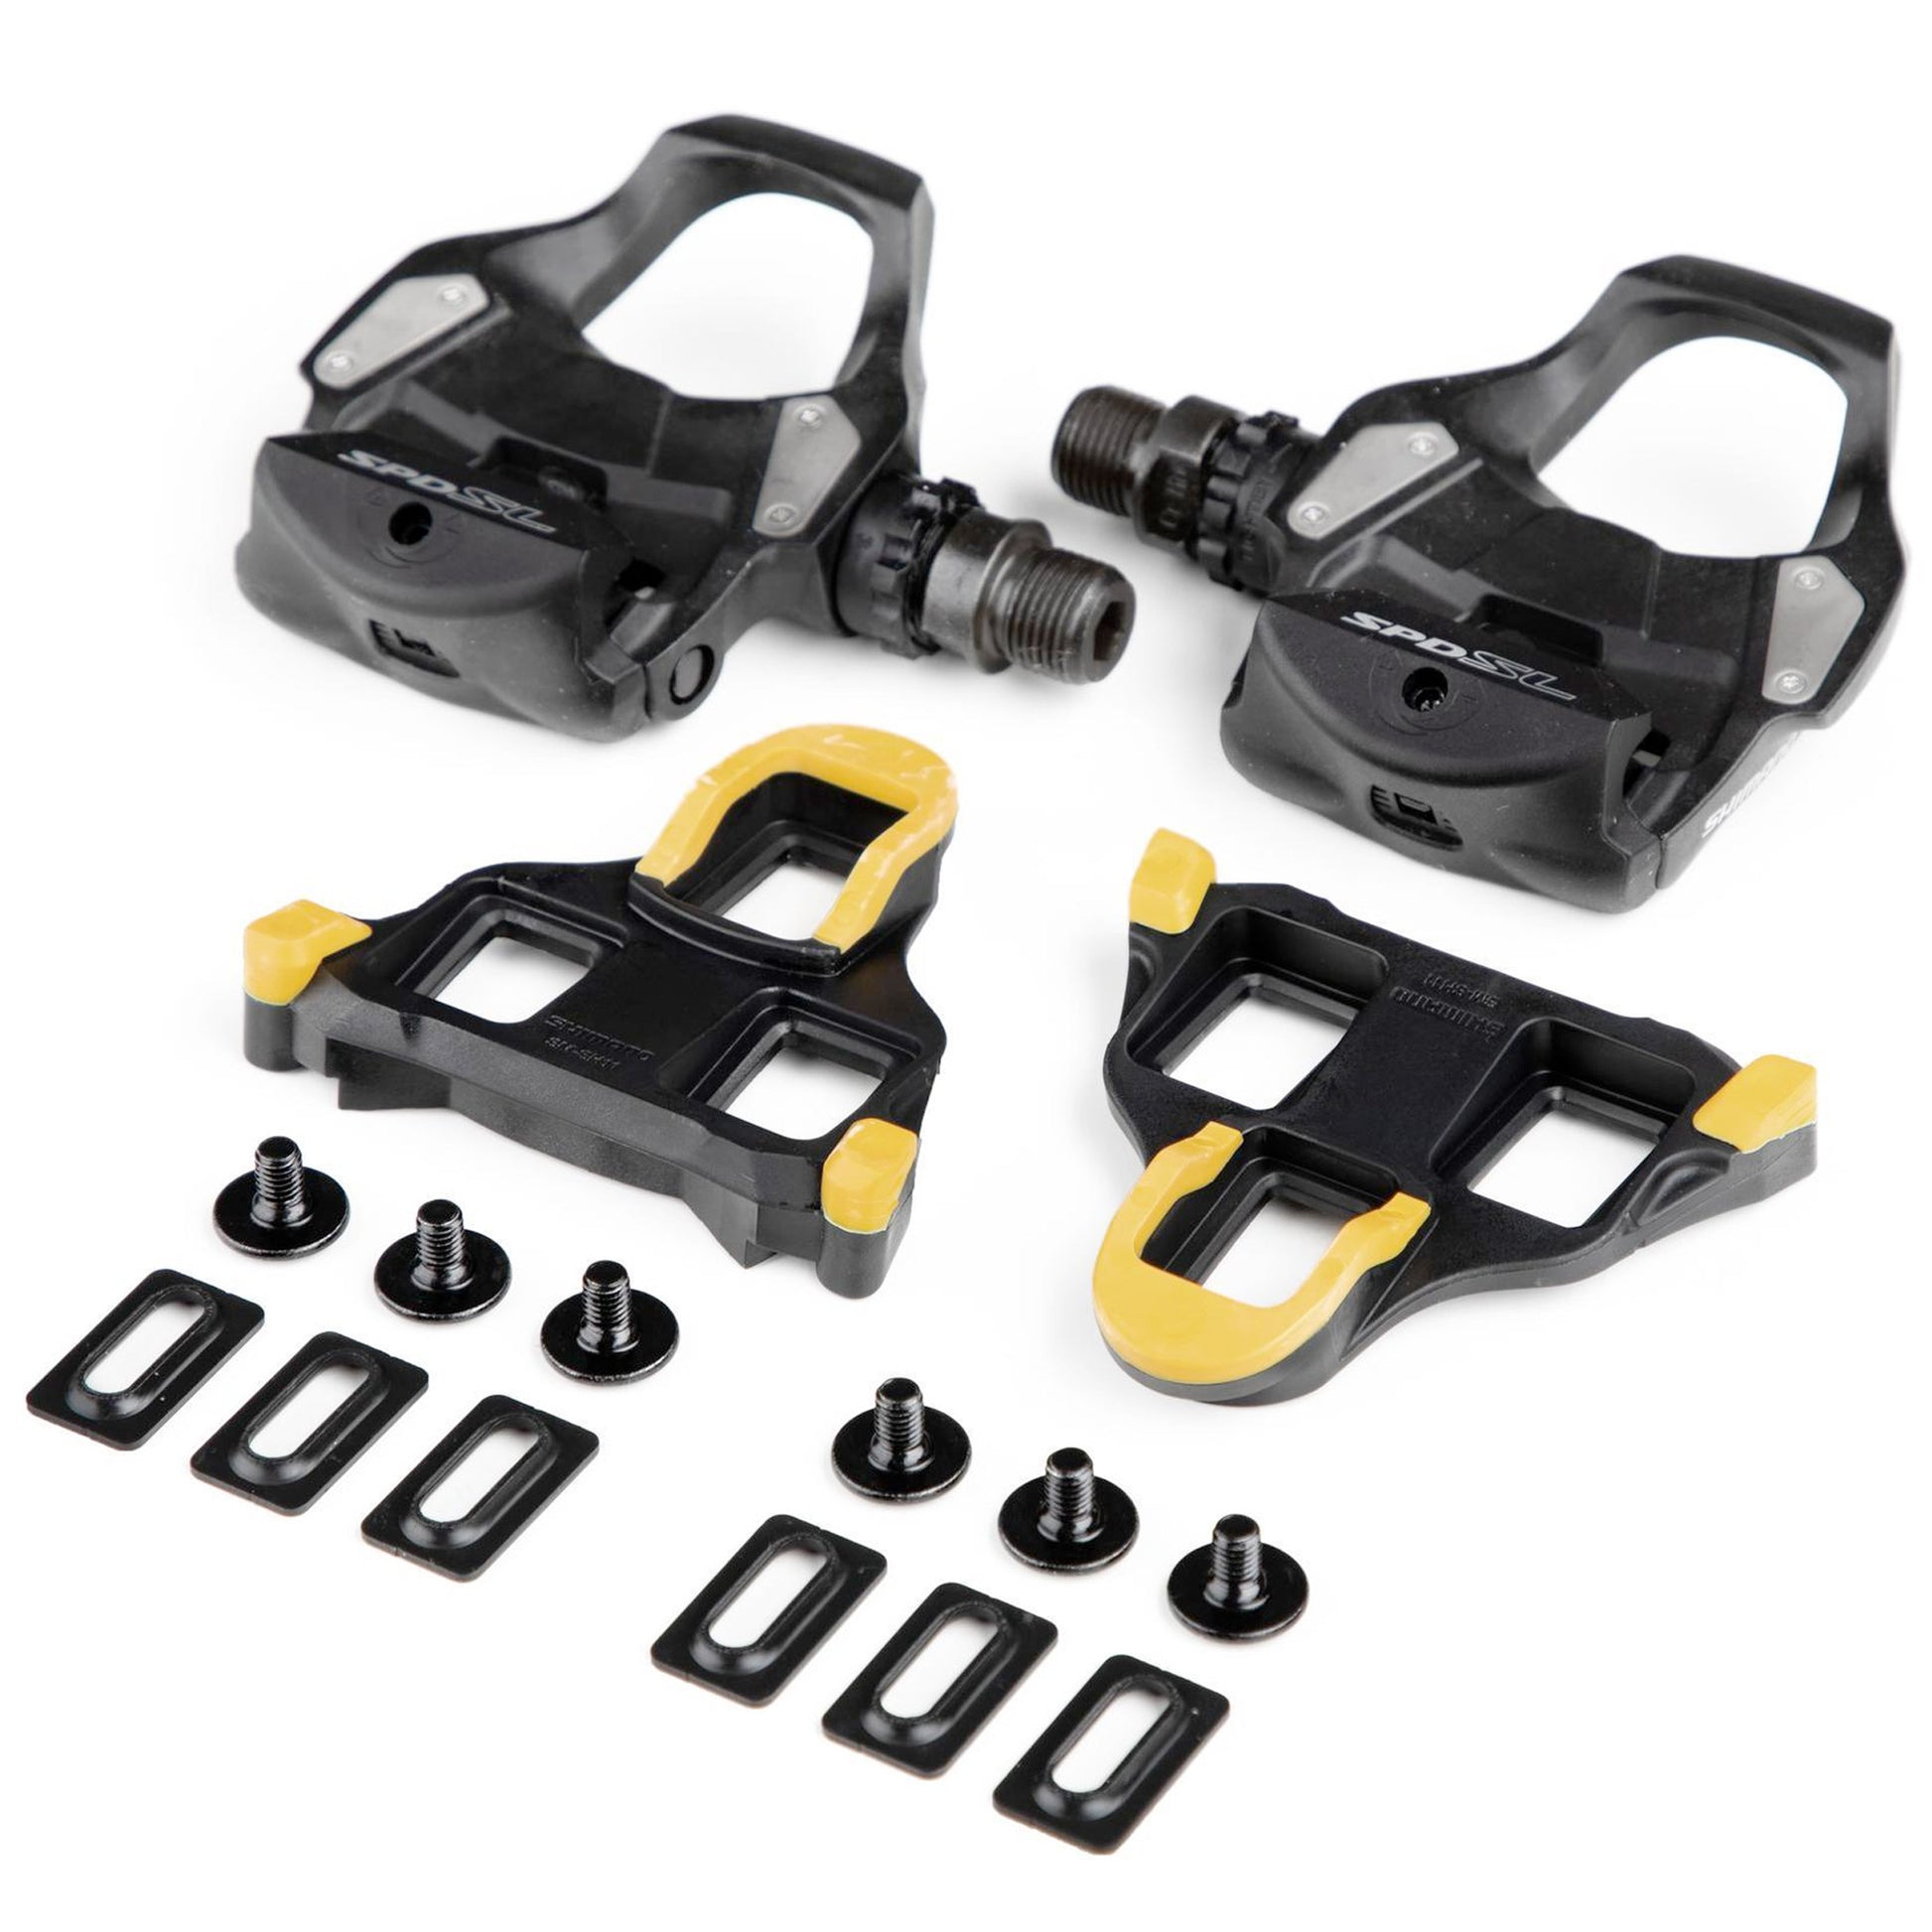 Shimano PD-RS500 SPD-SL Road Pedals - Black Including Cleats buy online at Woolys Wheels Sydney